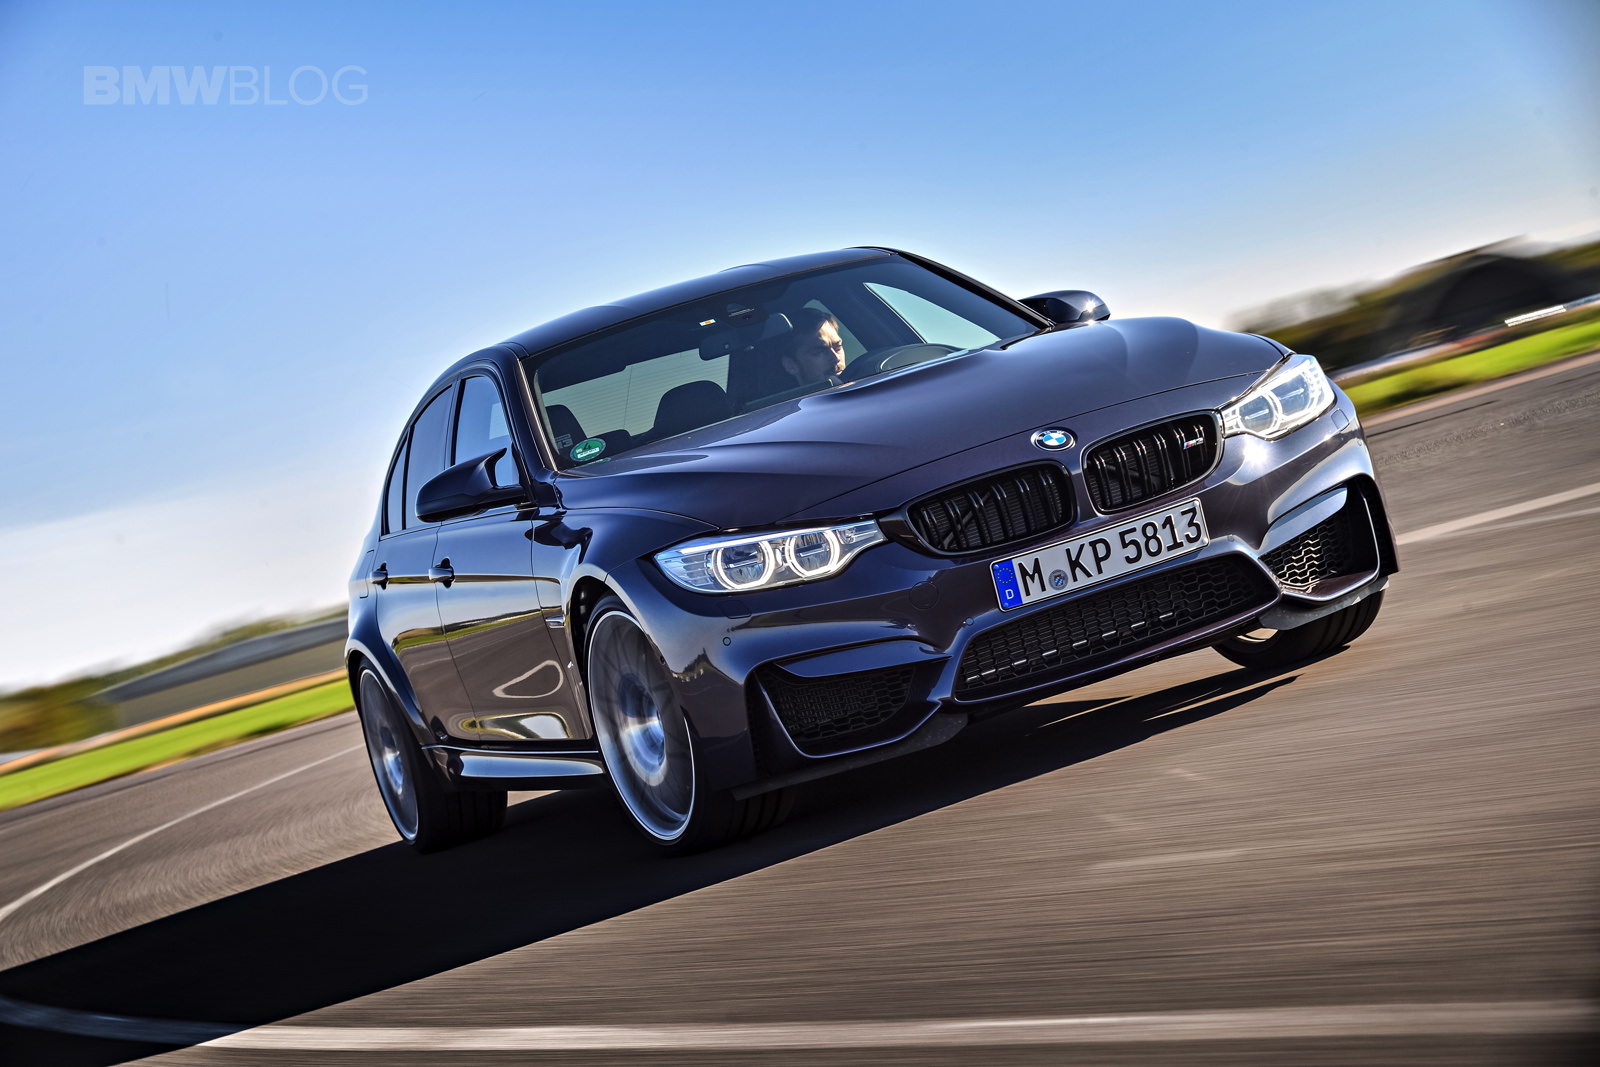 The BMW M3 30 Jahre anniversary model is a beauty